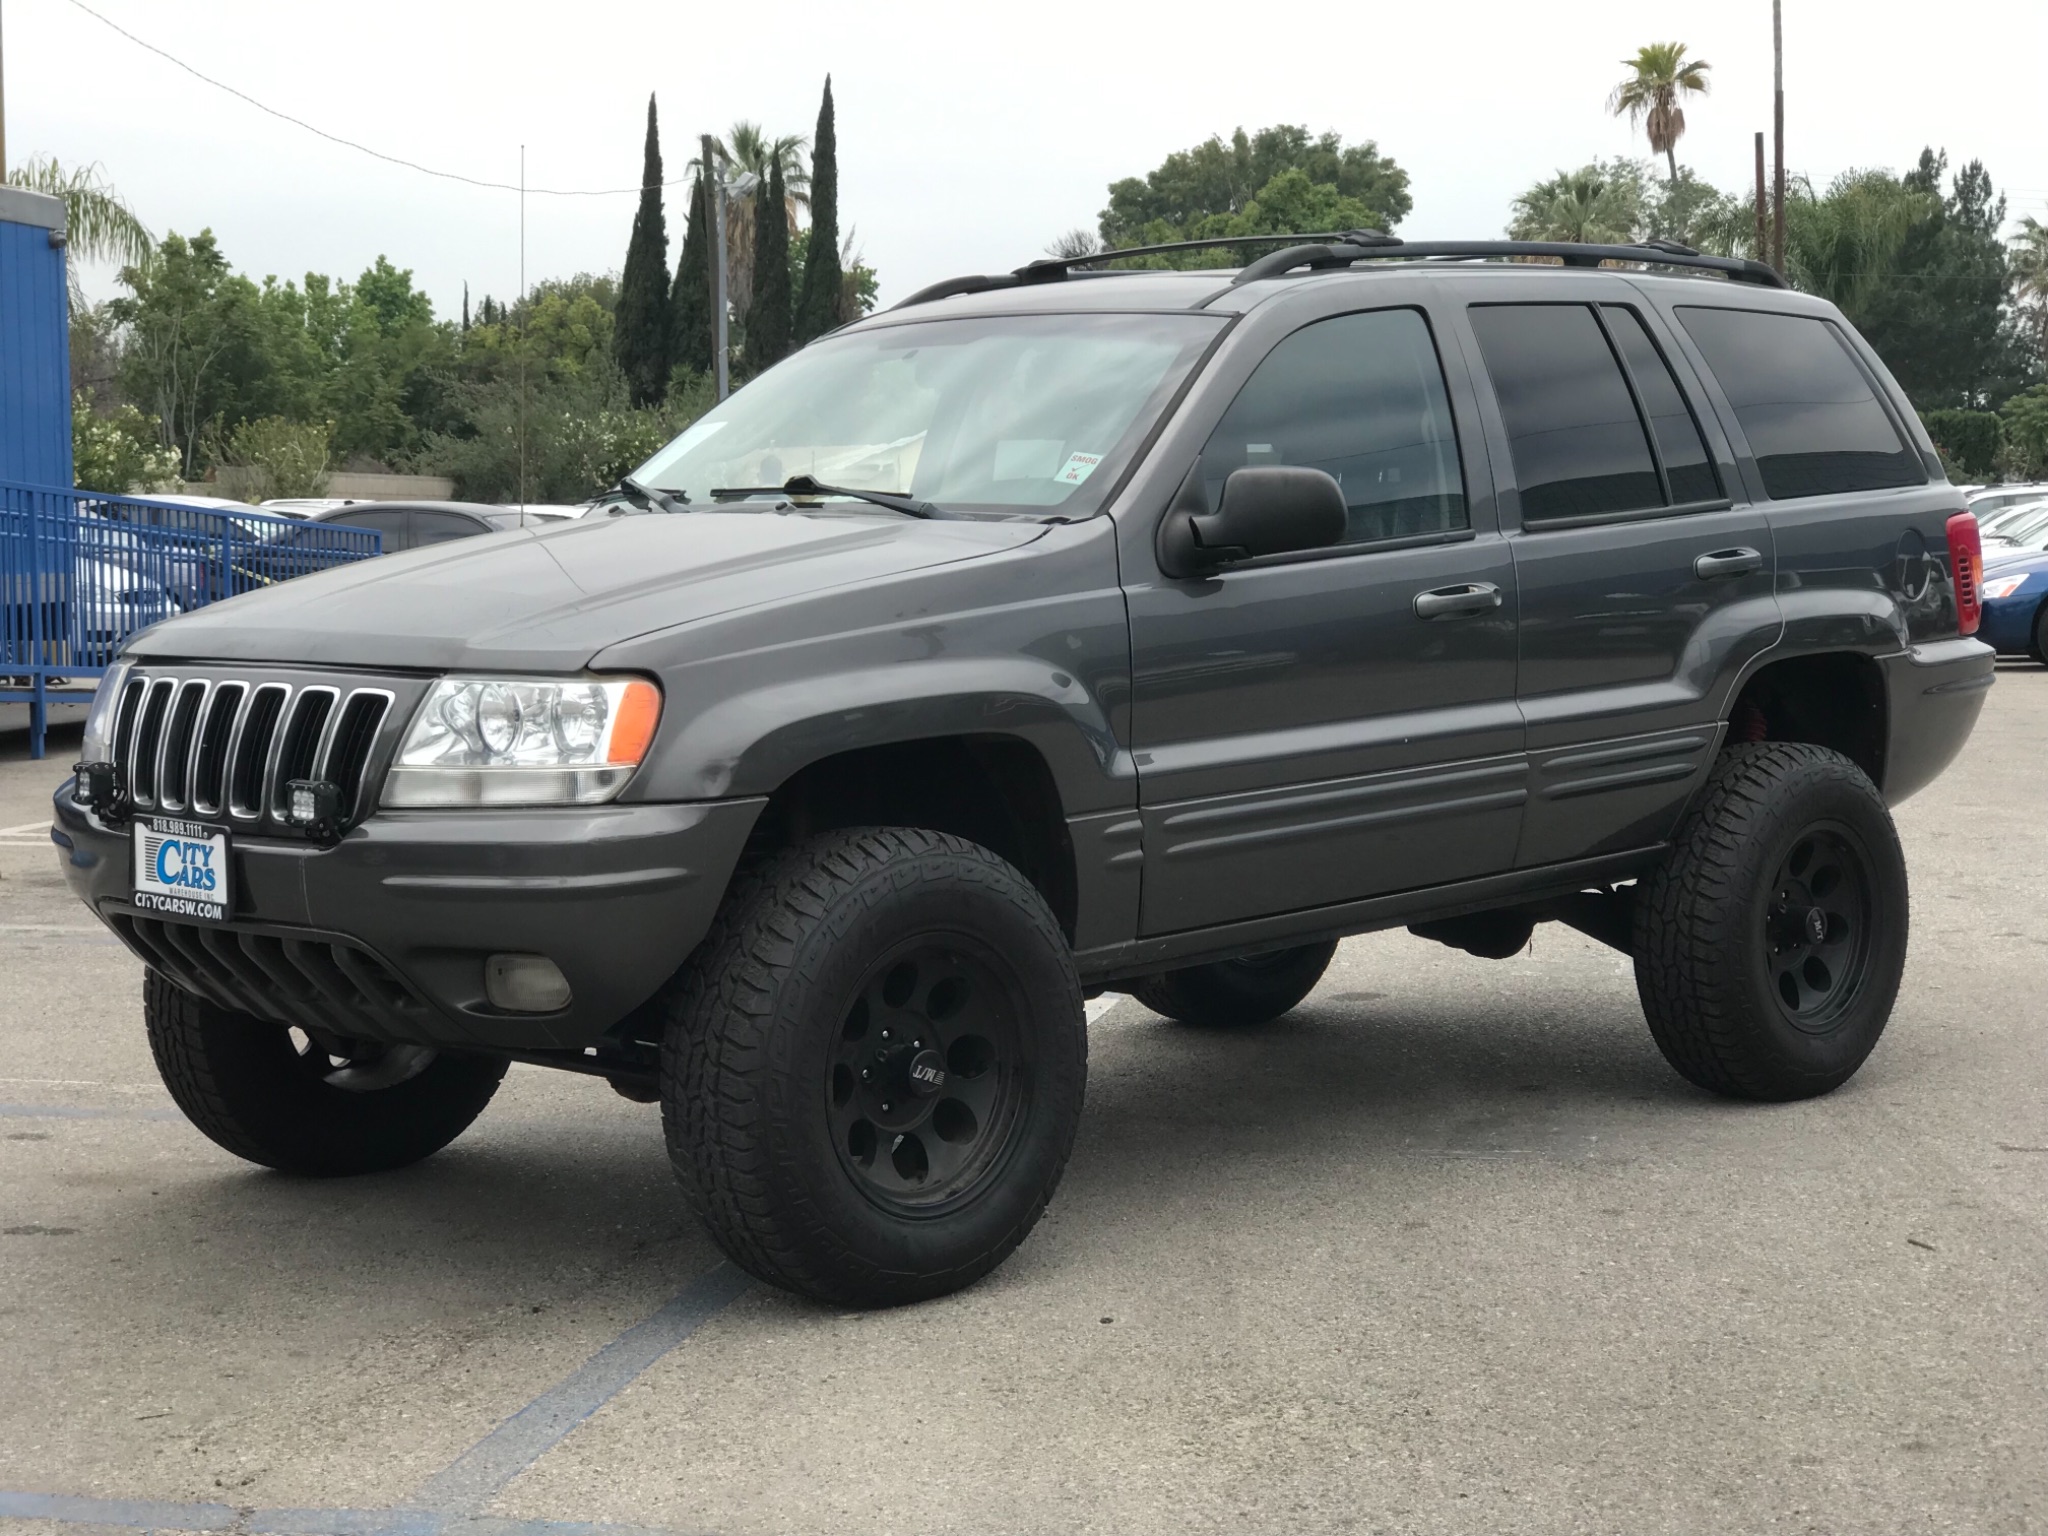 Used 2002 Jeep Grand Cherokee Limited at City Cars